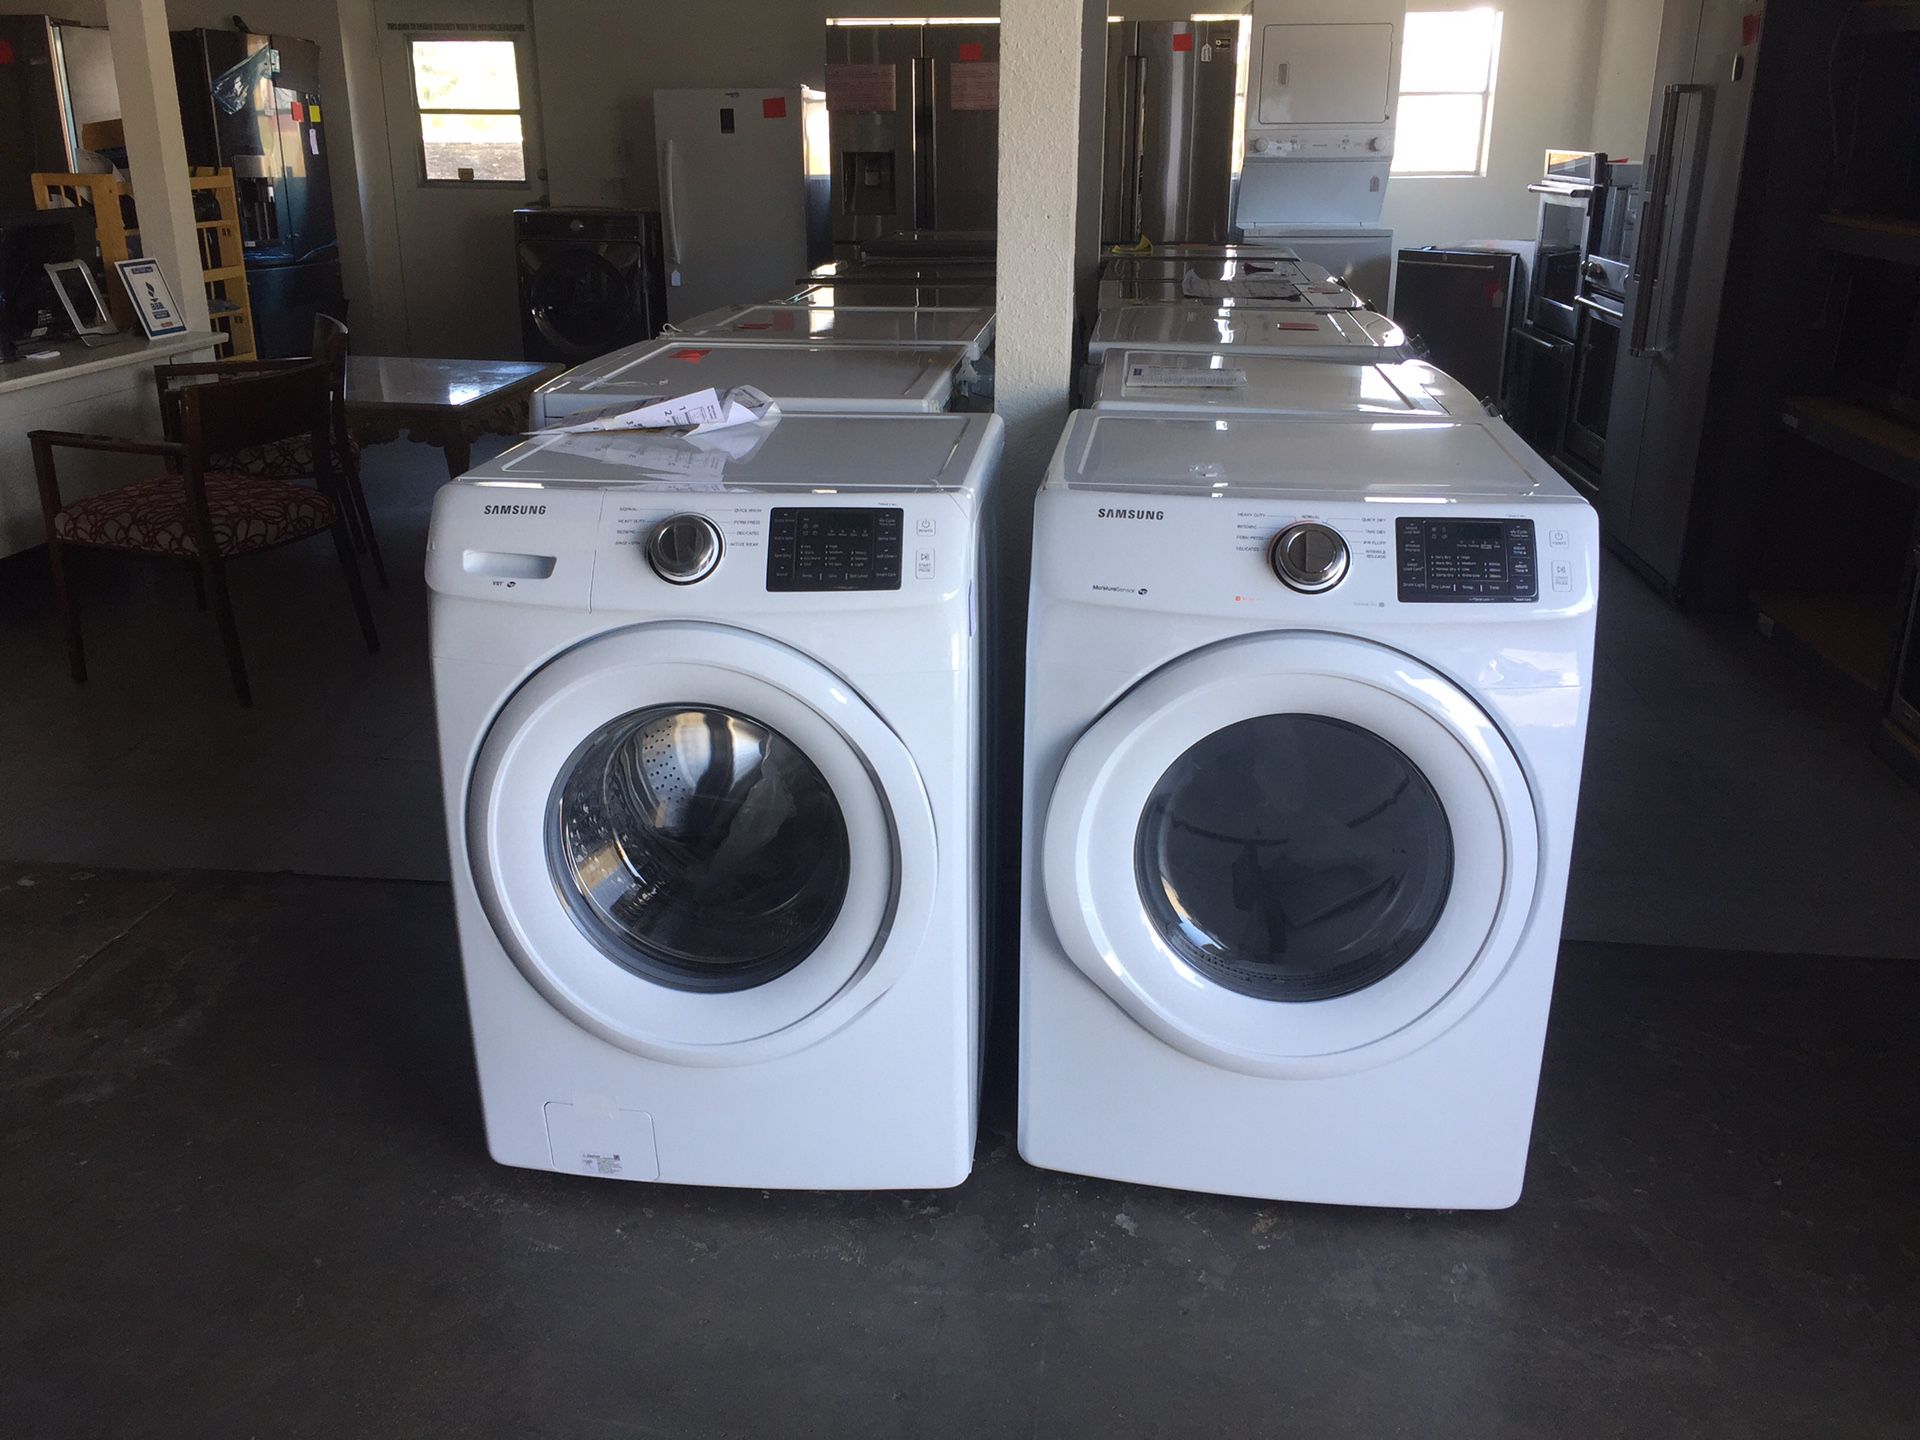 Samsung front load washer and gas dryer